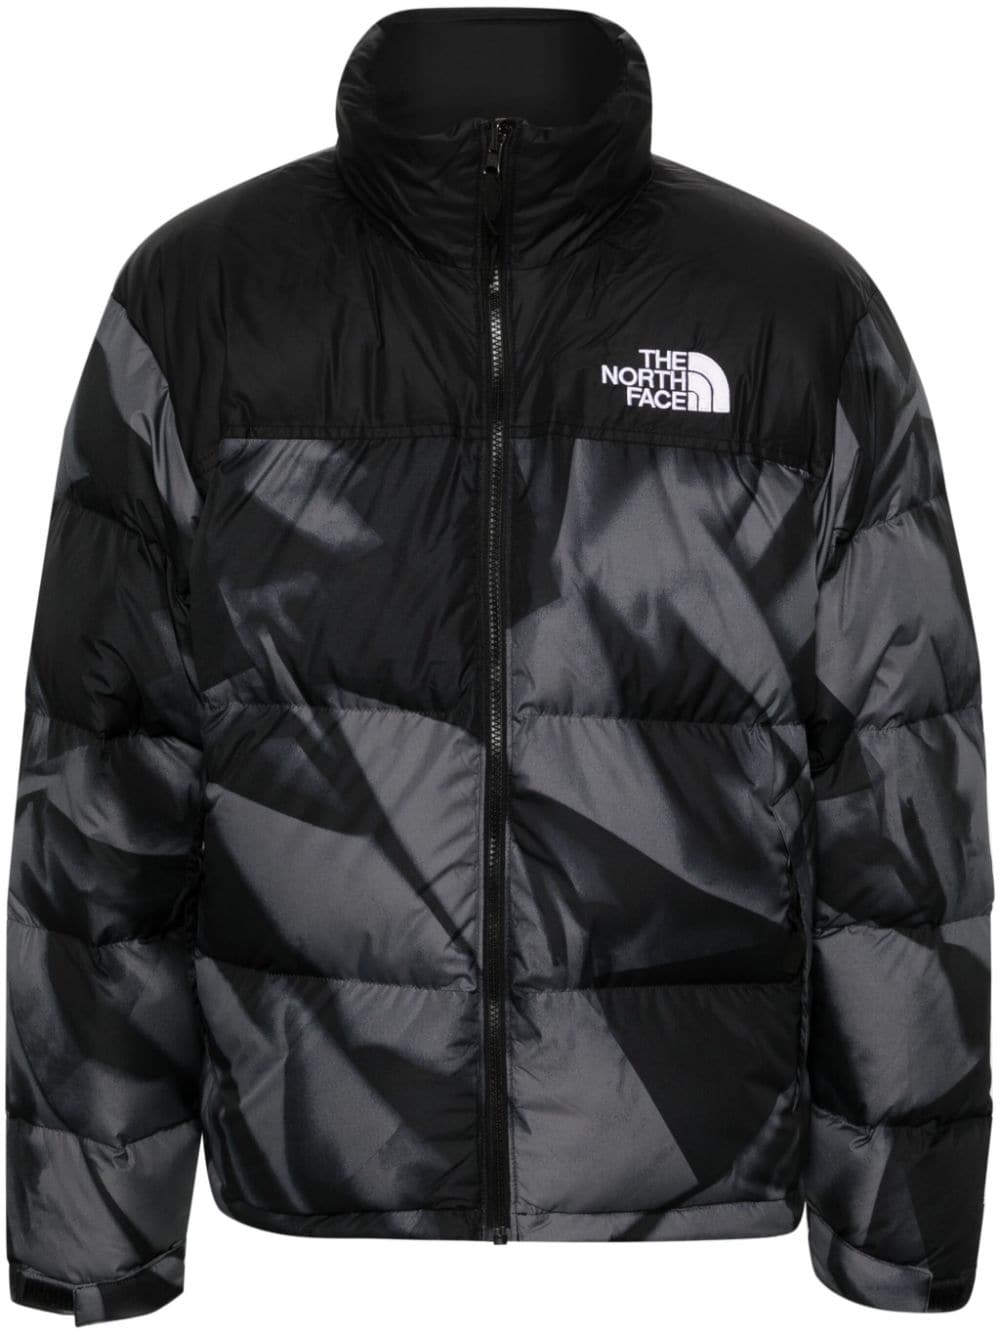 The North Face 1996 Retro Nuptse padded jacket - Black von The North Face